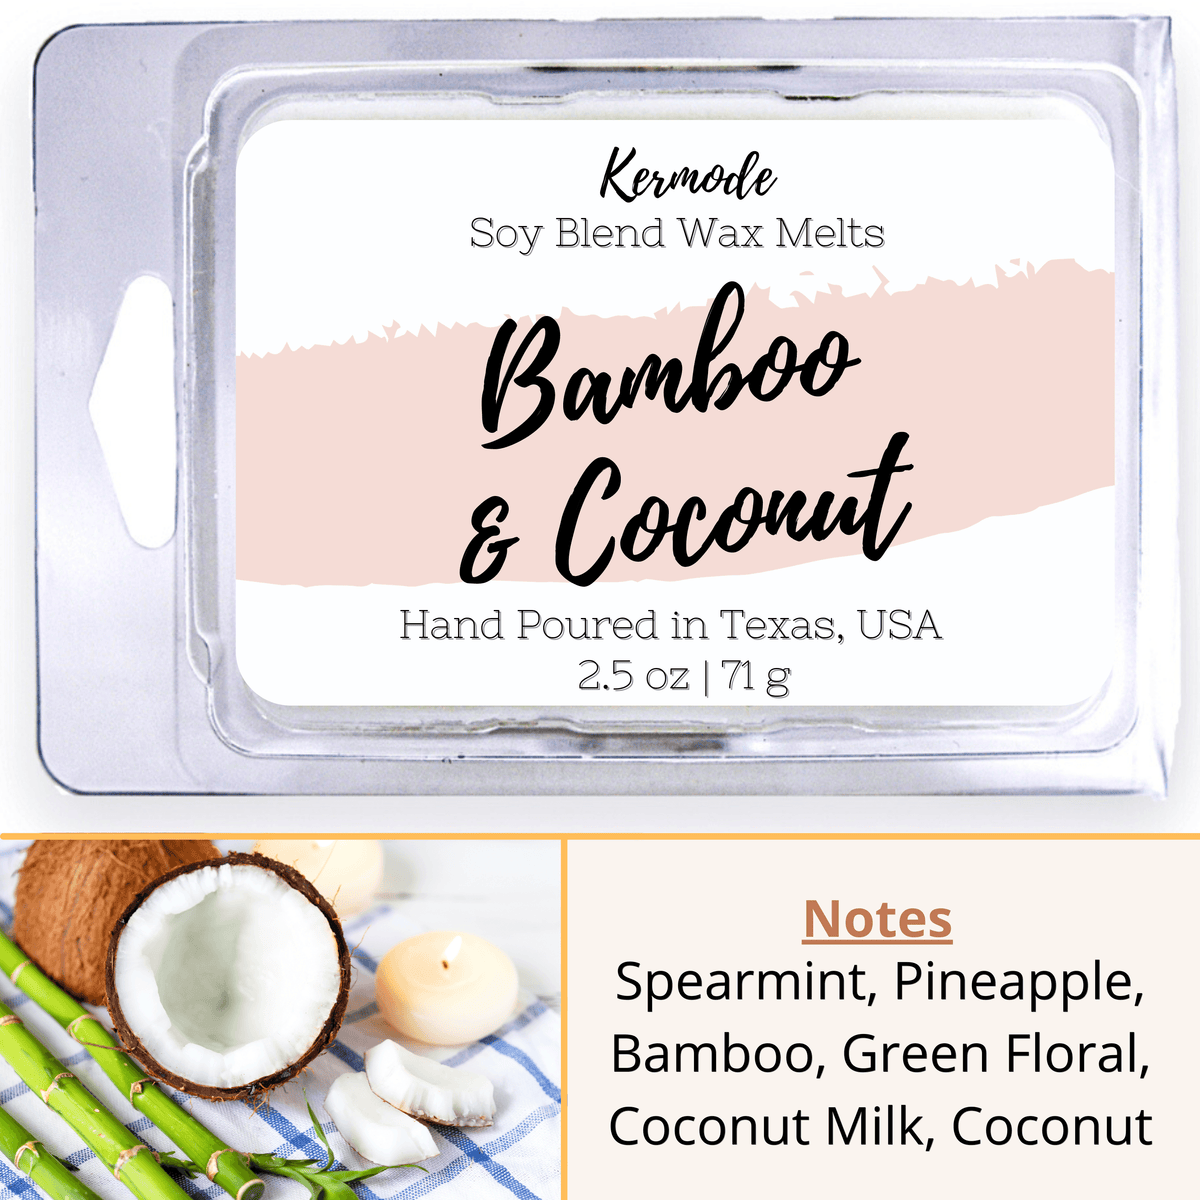 Bamboo & Coconut Wax Melts by Candlecopia®, 2 Pack